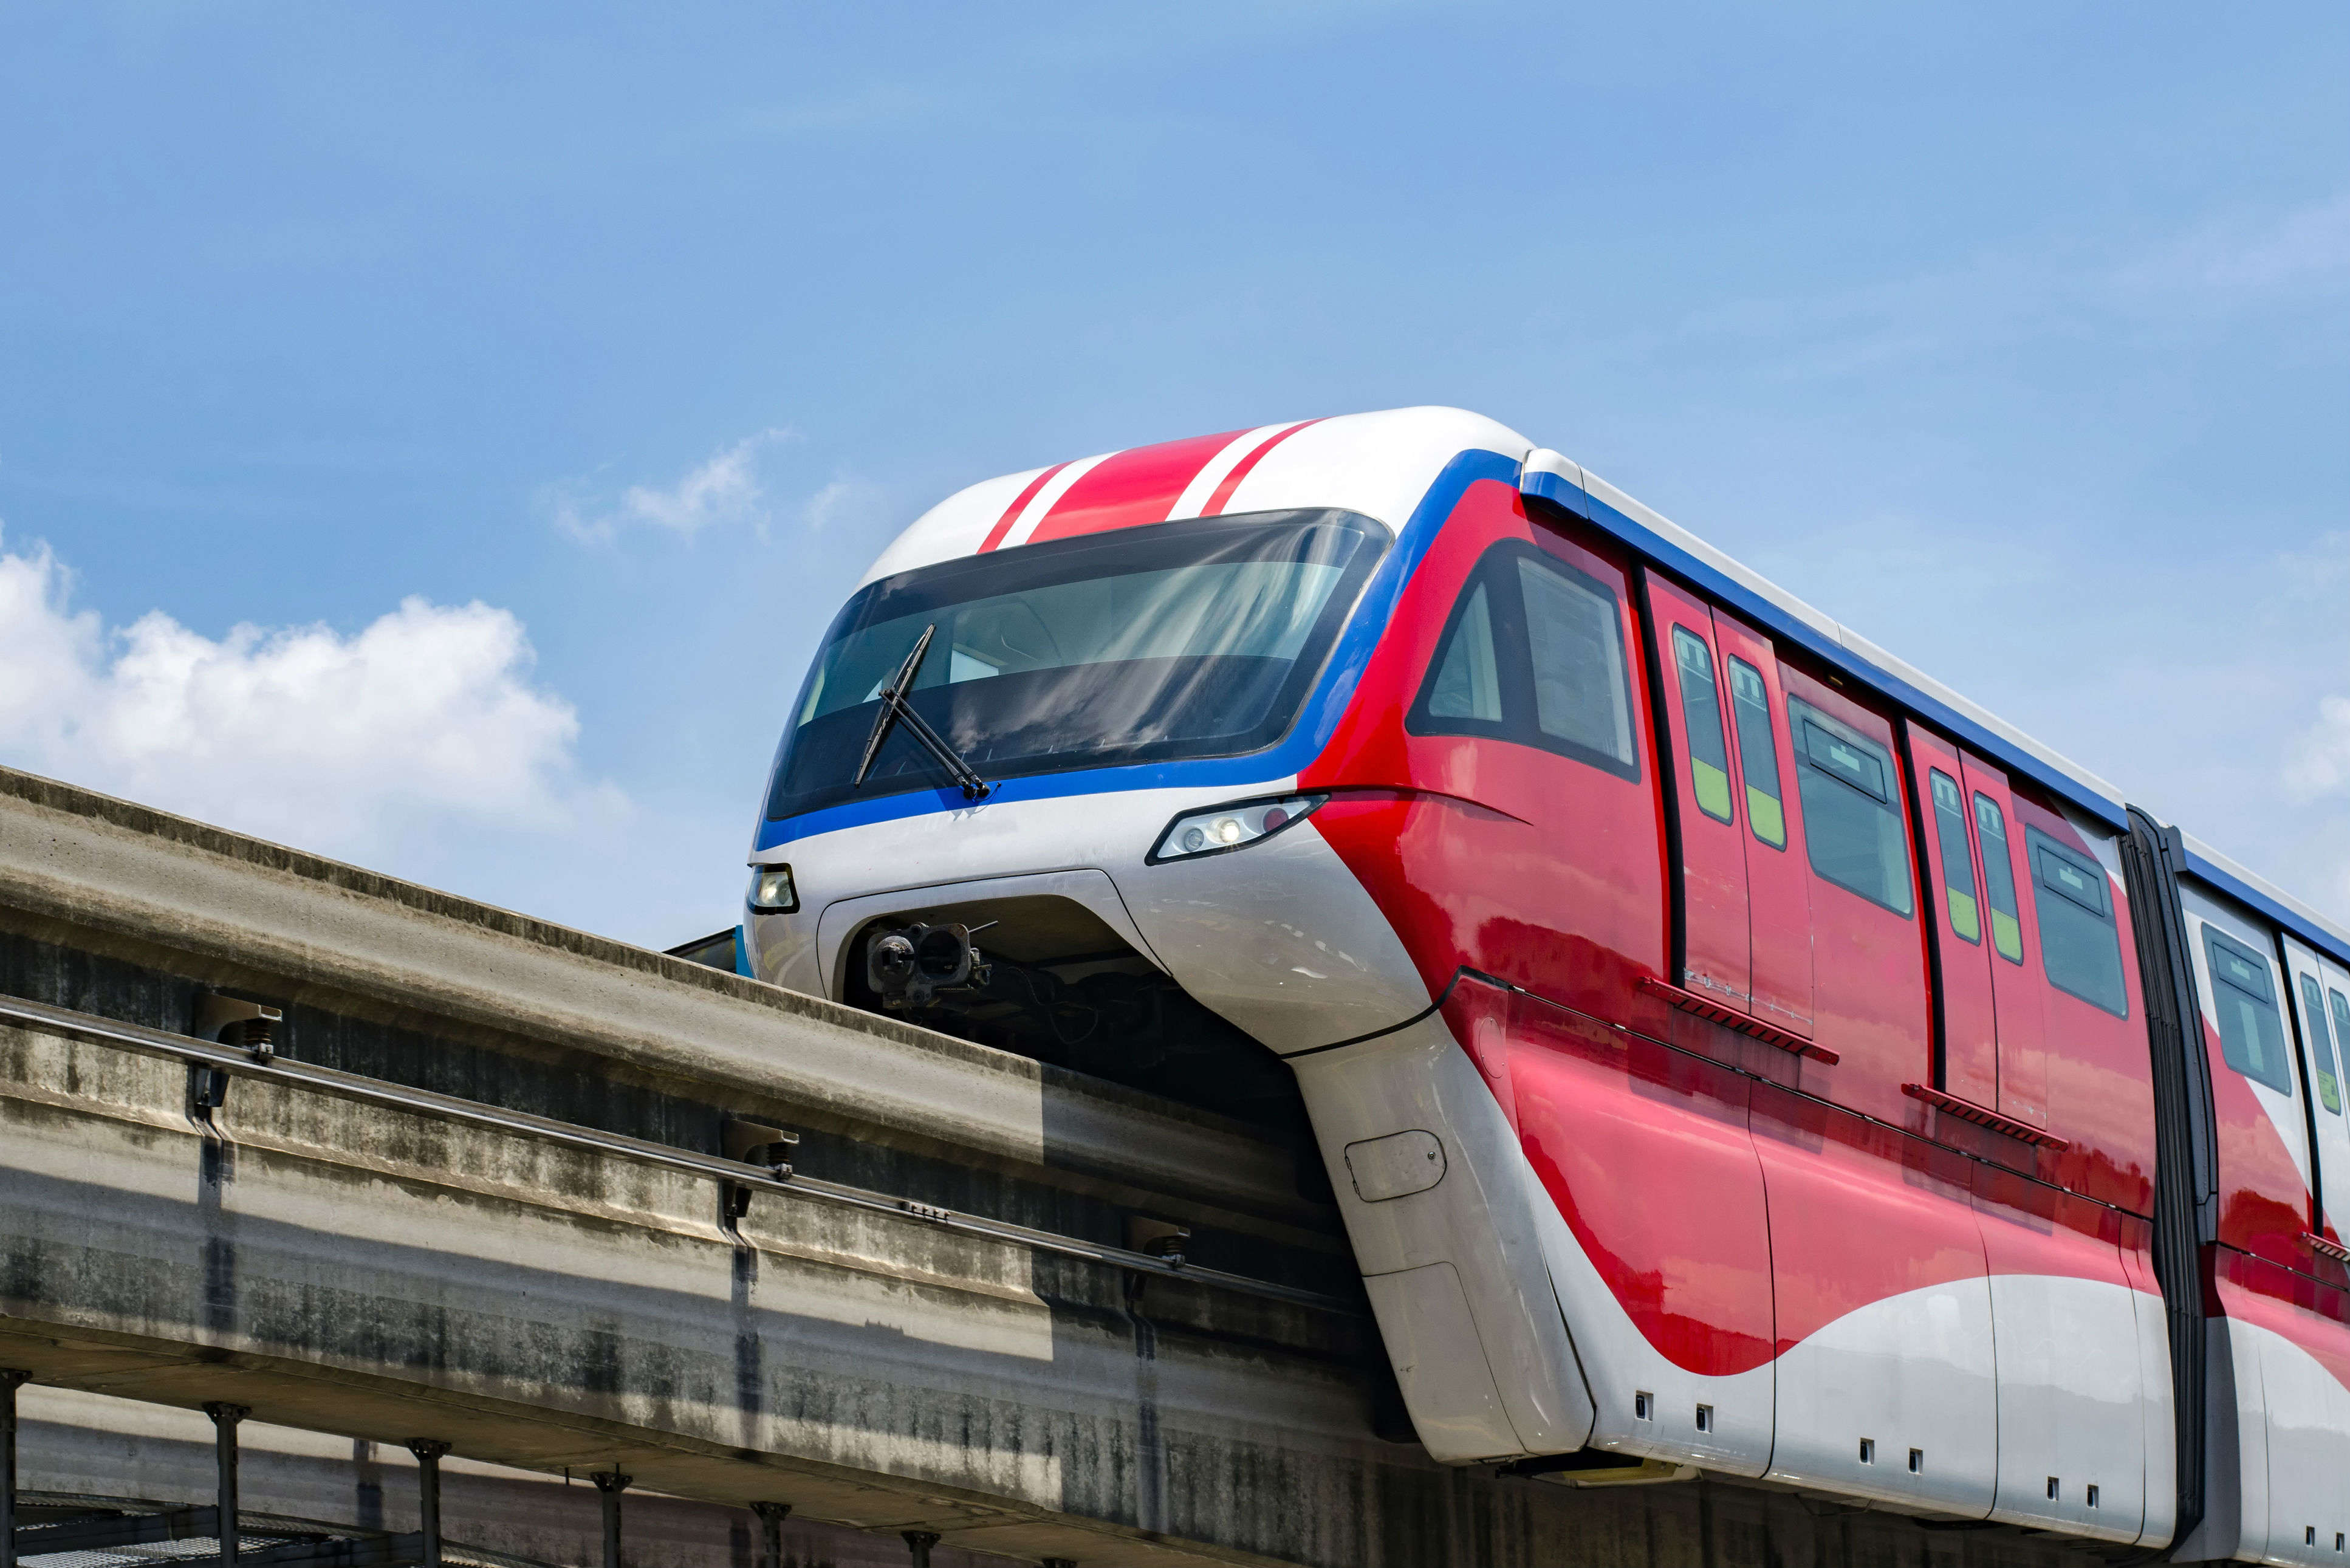 Mumbai Monorail Phase II opens up to help with your commuting woes